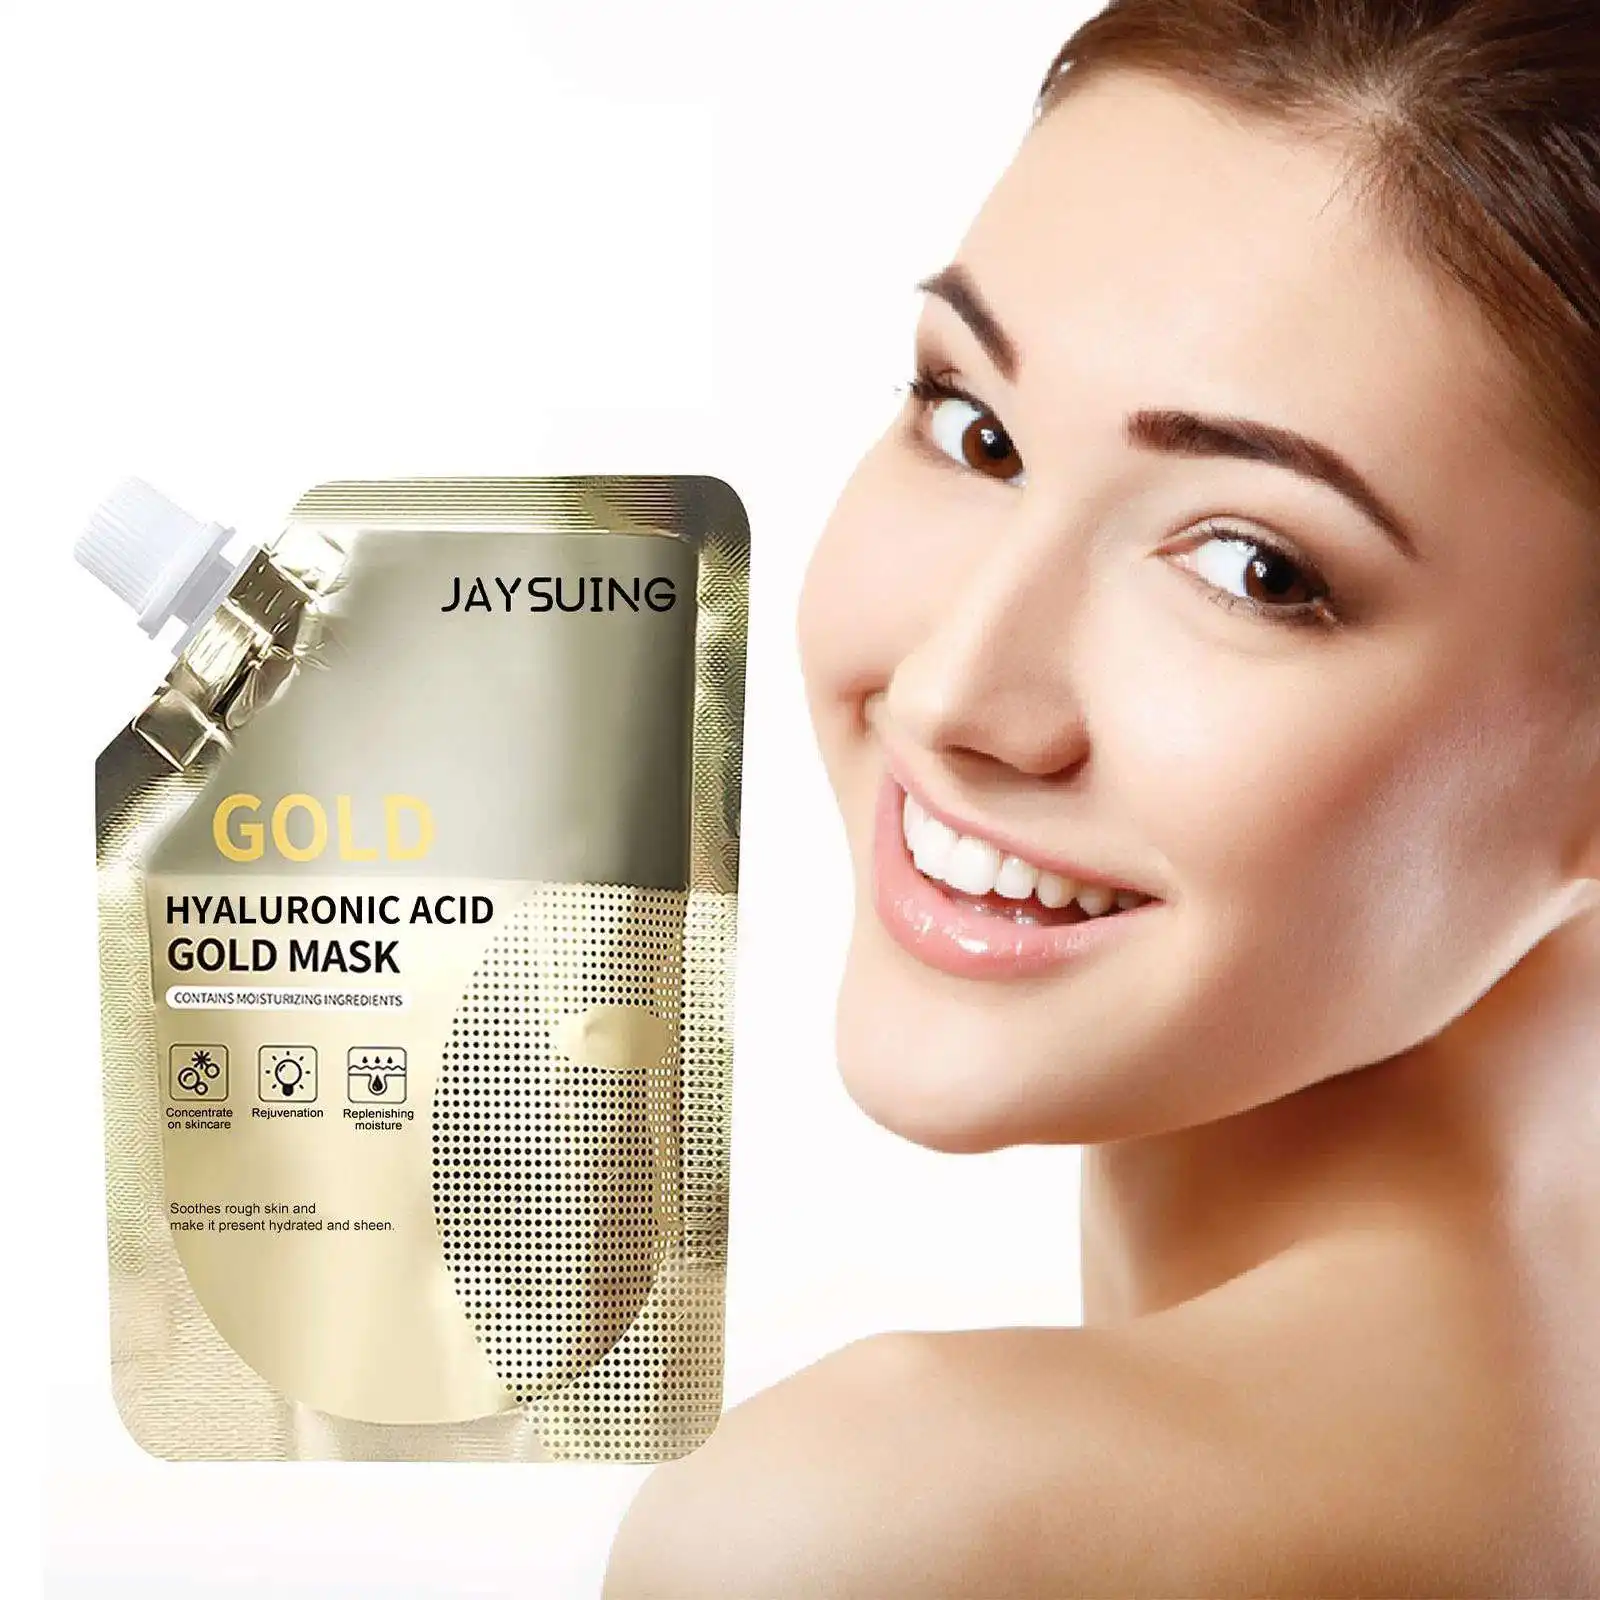 Jaysuing Retinol Gold Facial Mask Deeply Cleans Pores, Fades Fine Lines And Tightens Skin